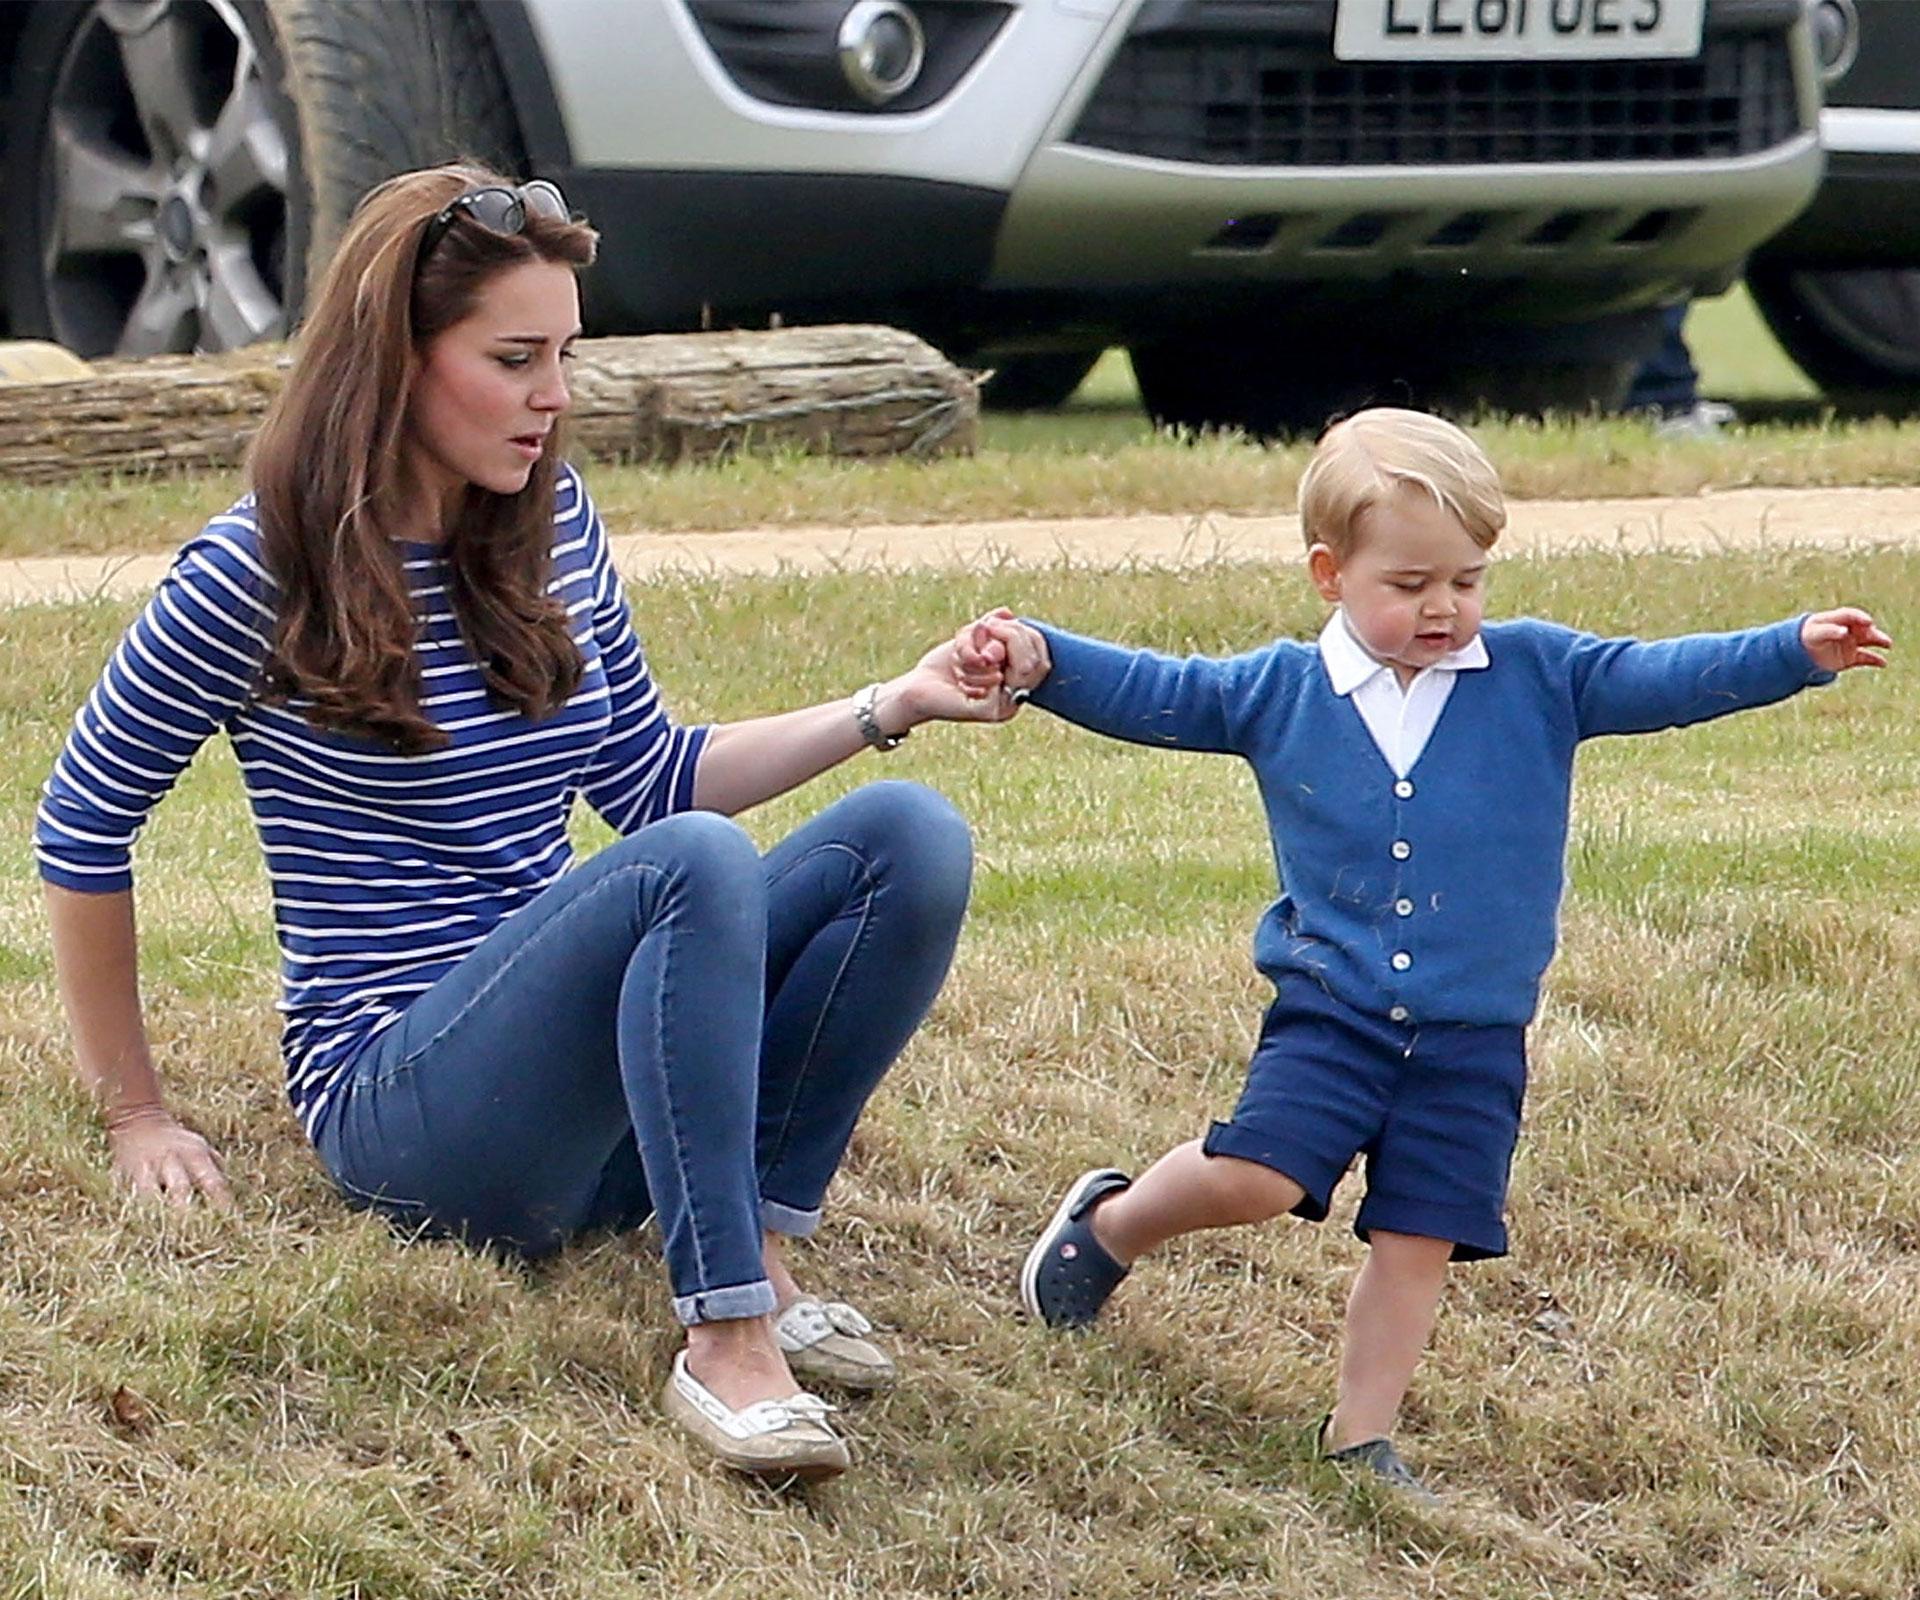 Prince George's day out at the polo